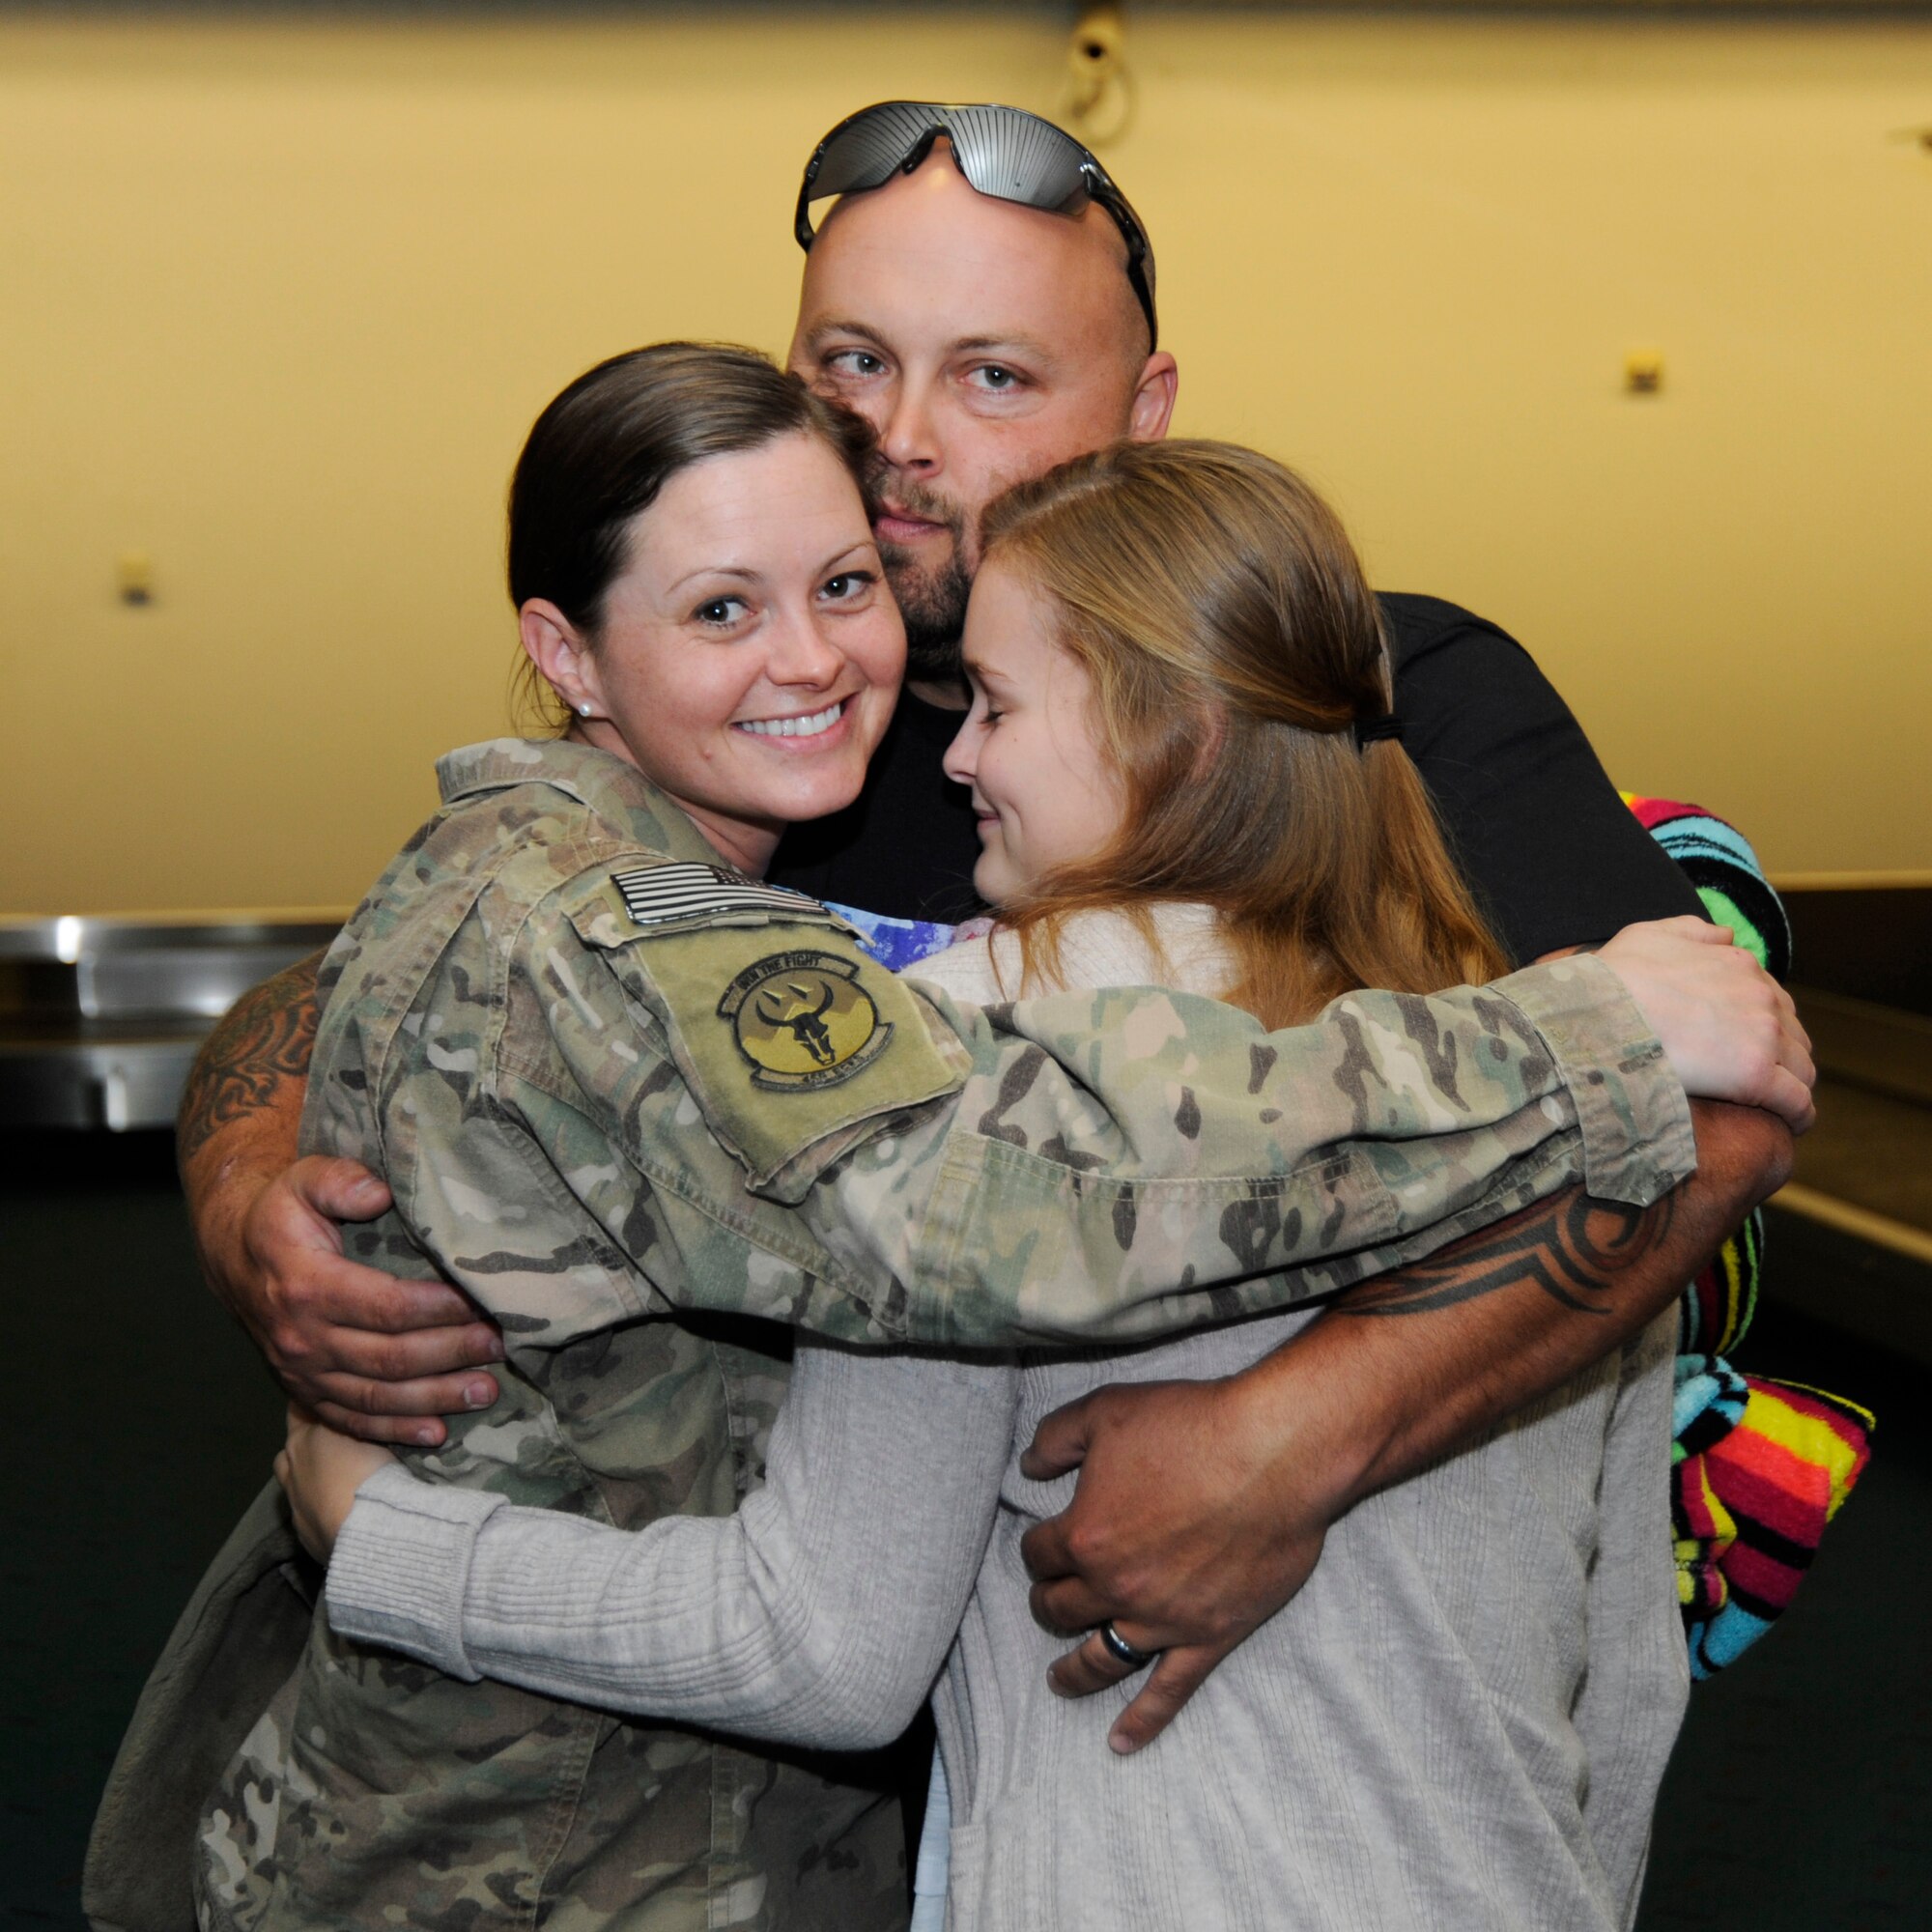 Oregon Staff Sgt. Alicia Tishmack, an emergency management specialist assigned to the 142nd Fighter Wing Civil Engineer Squadron is greeted by family members at the Portland International Airport, Oct. 10, 2014, after returning from deployment in support of Operation Enduring Freedom. (U.S. Air National Guard photo by Tech. Sgt. John Hughel, 142nd Fighter Wing Public Affairs/Released)